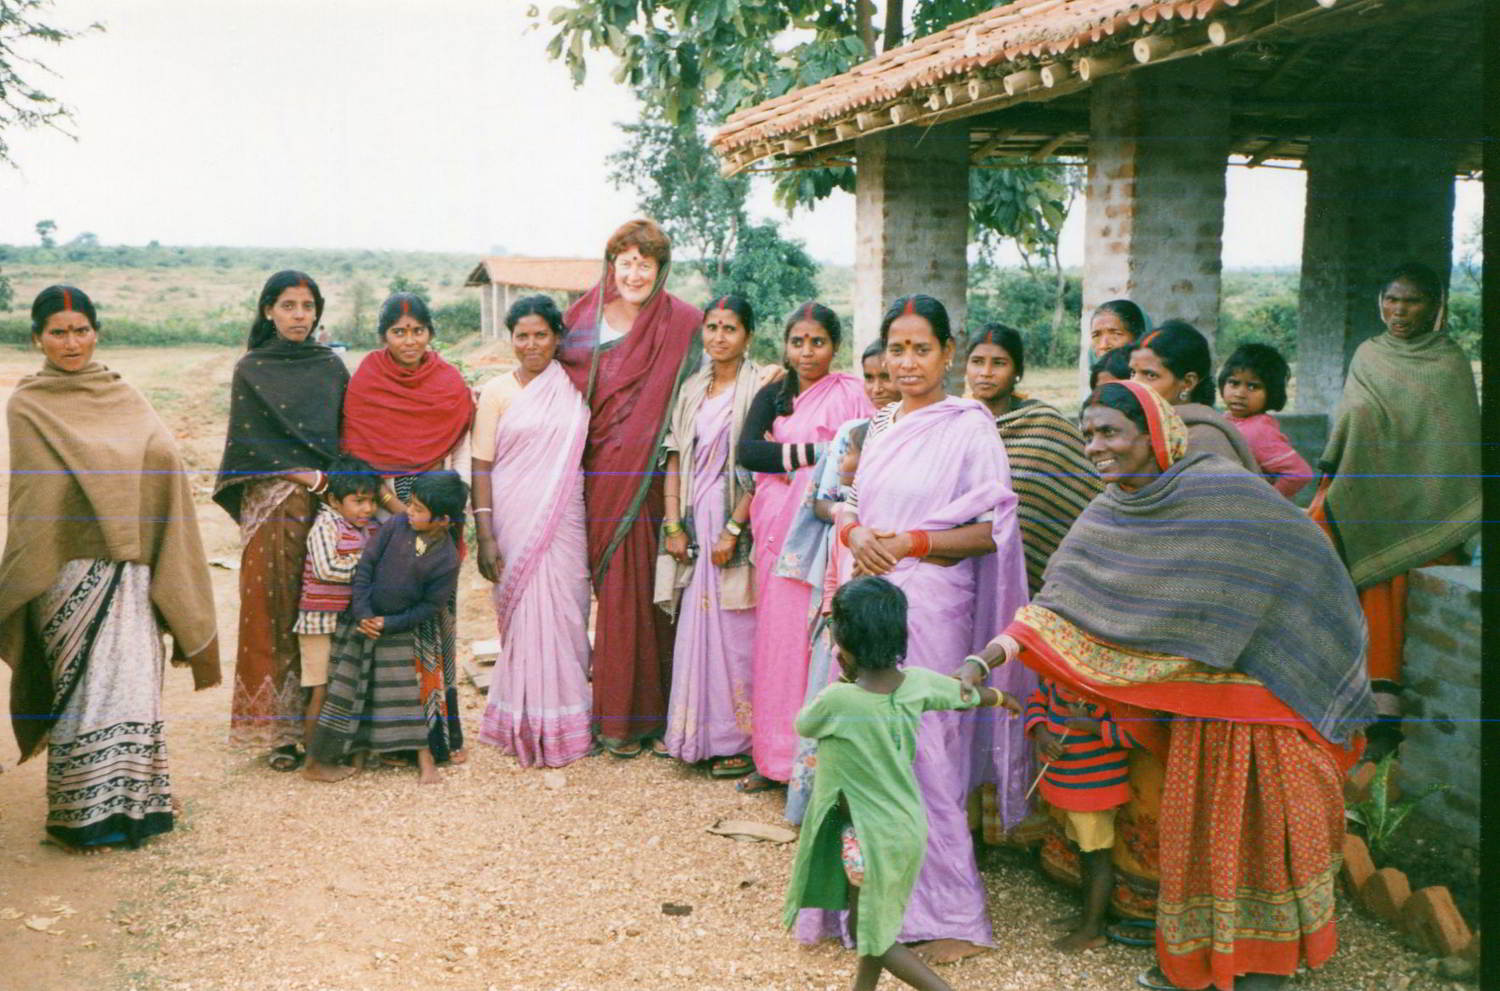 Handspan Theatre Banquet research in India group portrait of local villagers dressed in their best with costumed Australian visitor in the middle